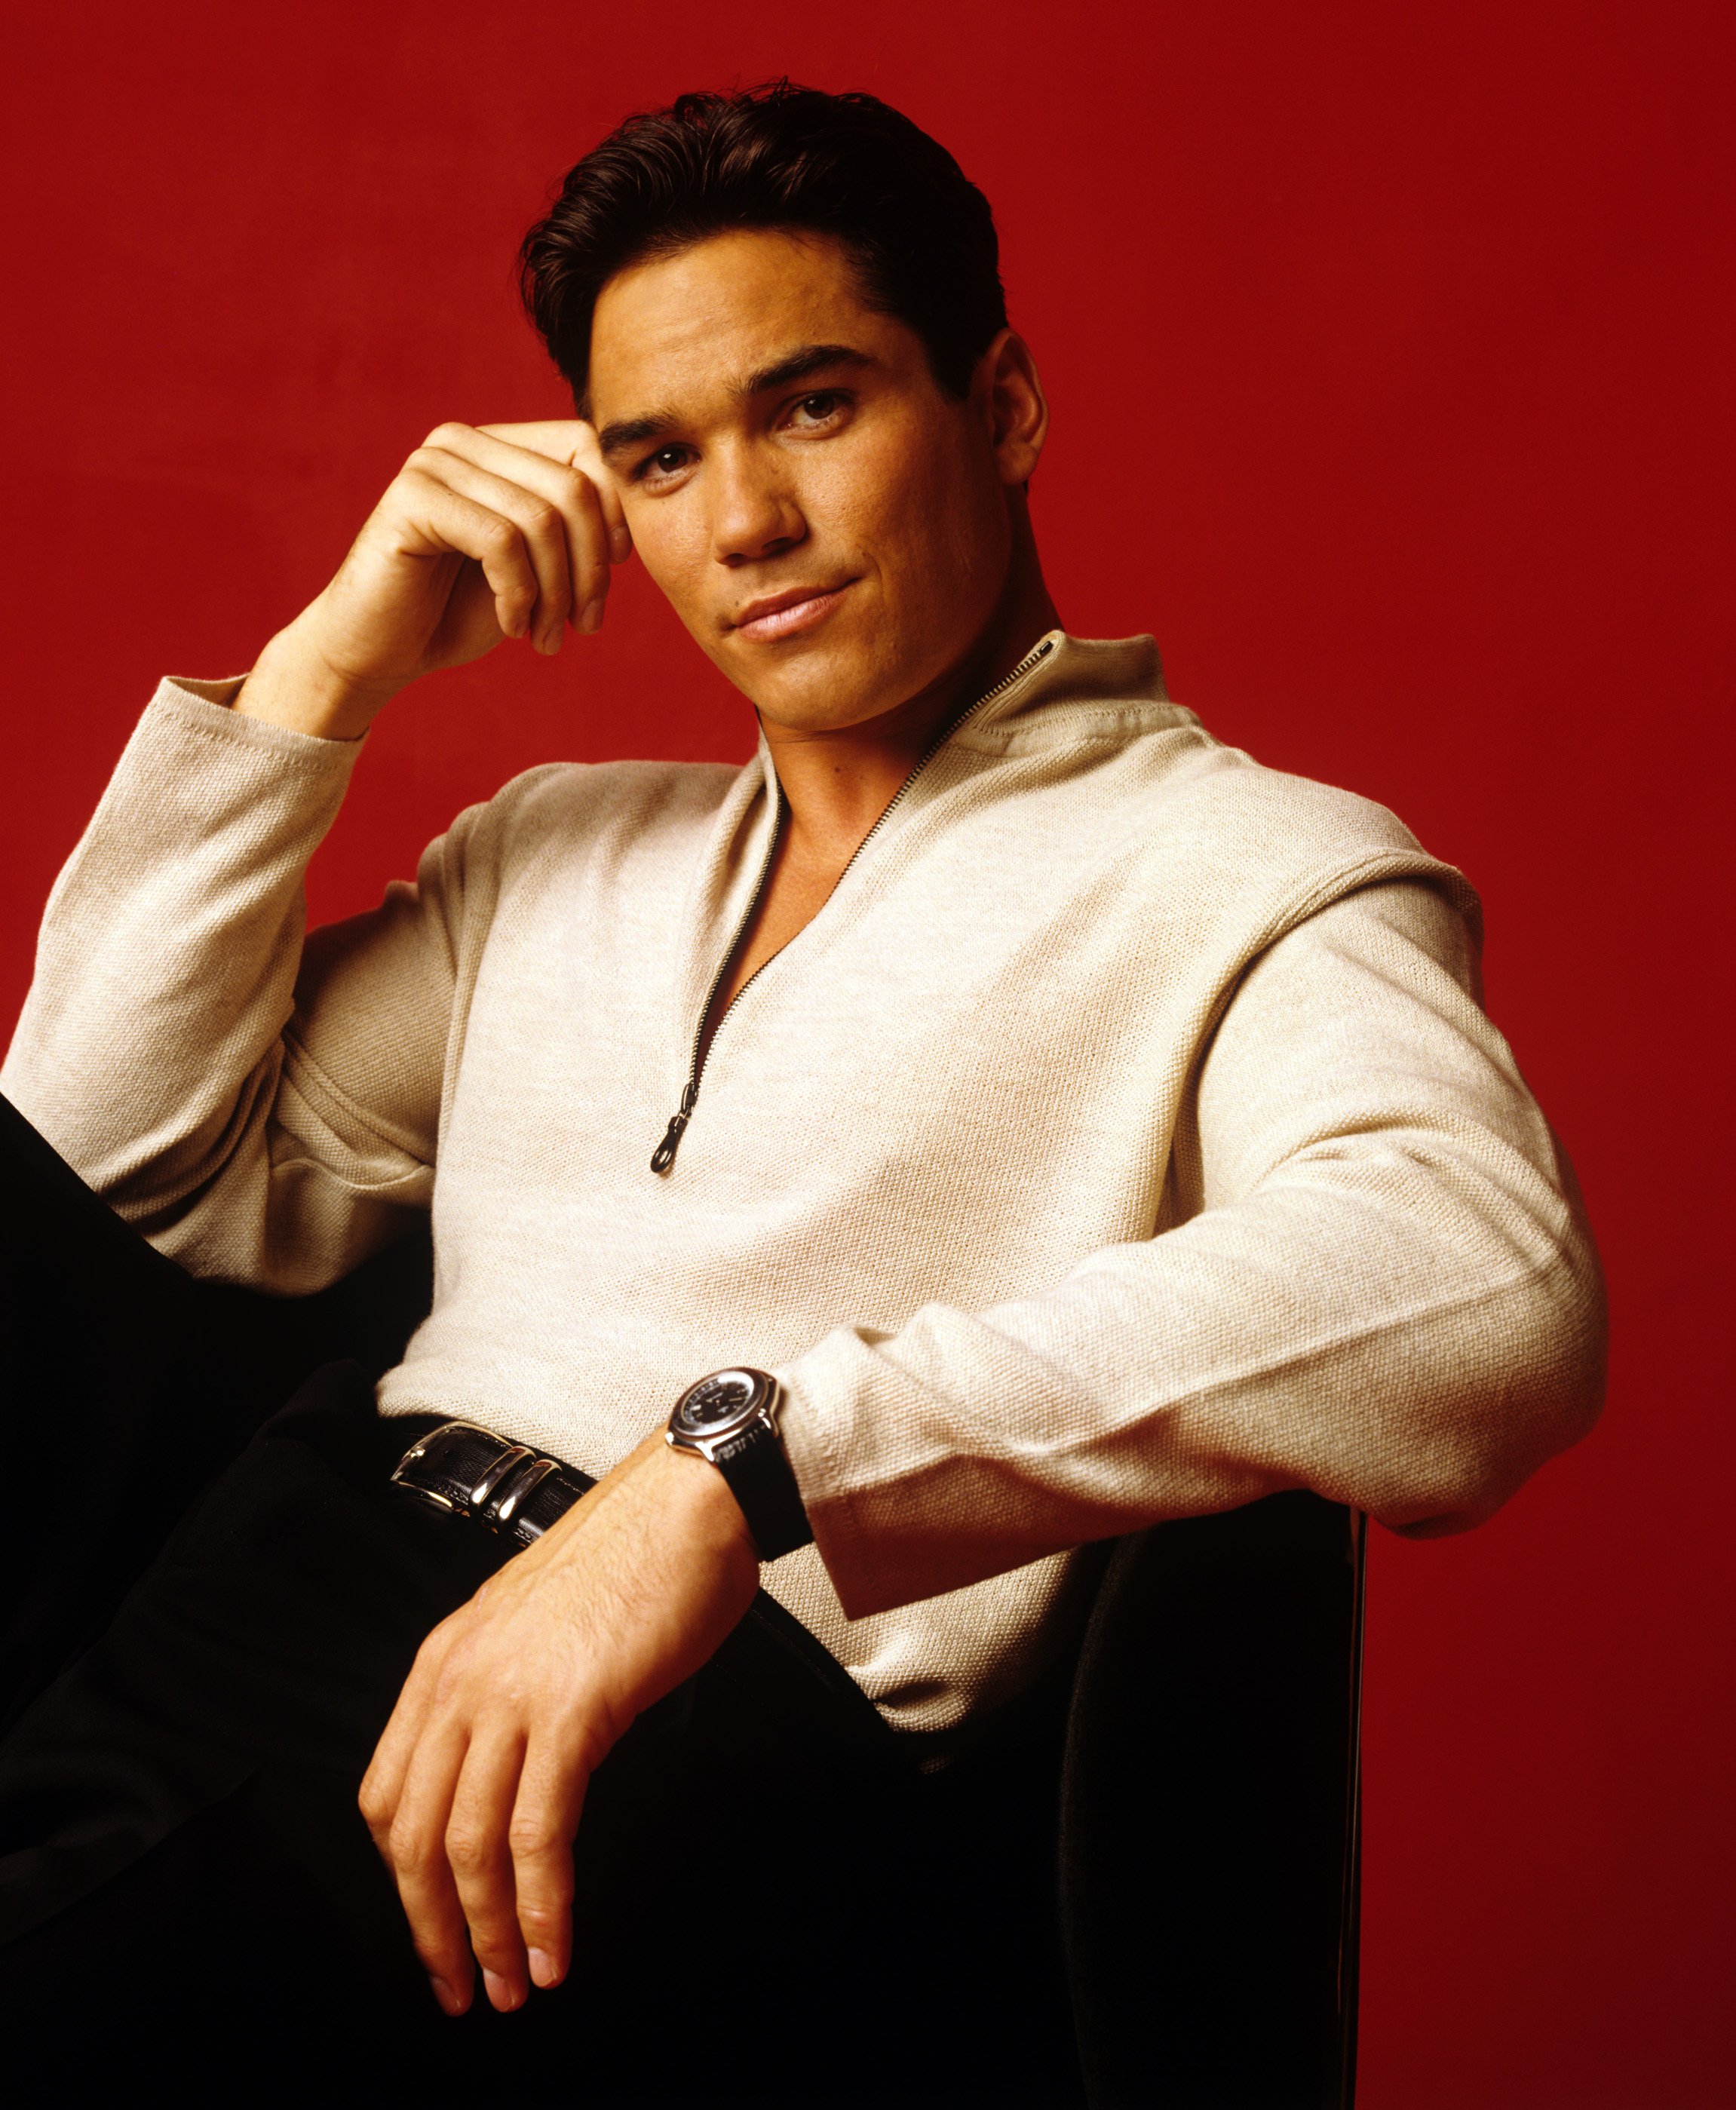 Producer and television personality Dean Cain as Clark on "Lois Clark The New Adventures Of Superman," on November 18, 1995. / Source: Getty Images